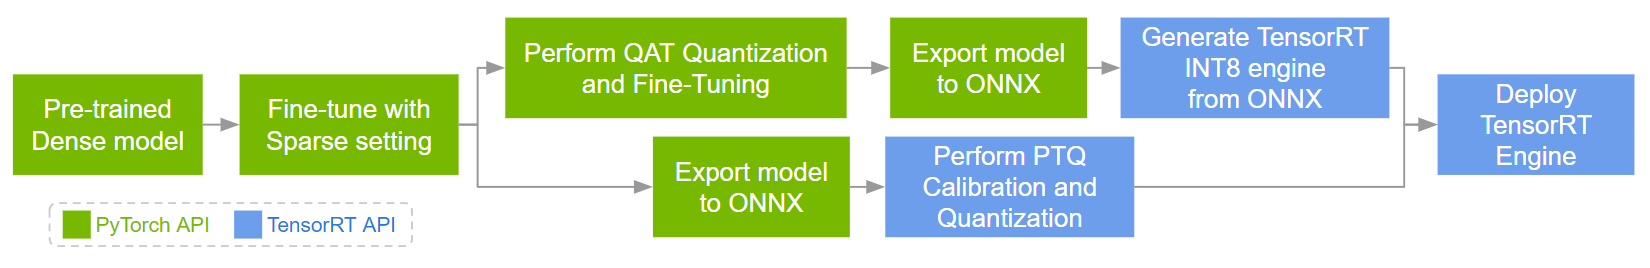 Diagram compares the full workflows for PTQ and QAT, which start off similarly with sparsity fine-tuning and then differs into QAT fine-tuning through the PyTorch API or PTQ calibration through the TensorRT API.